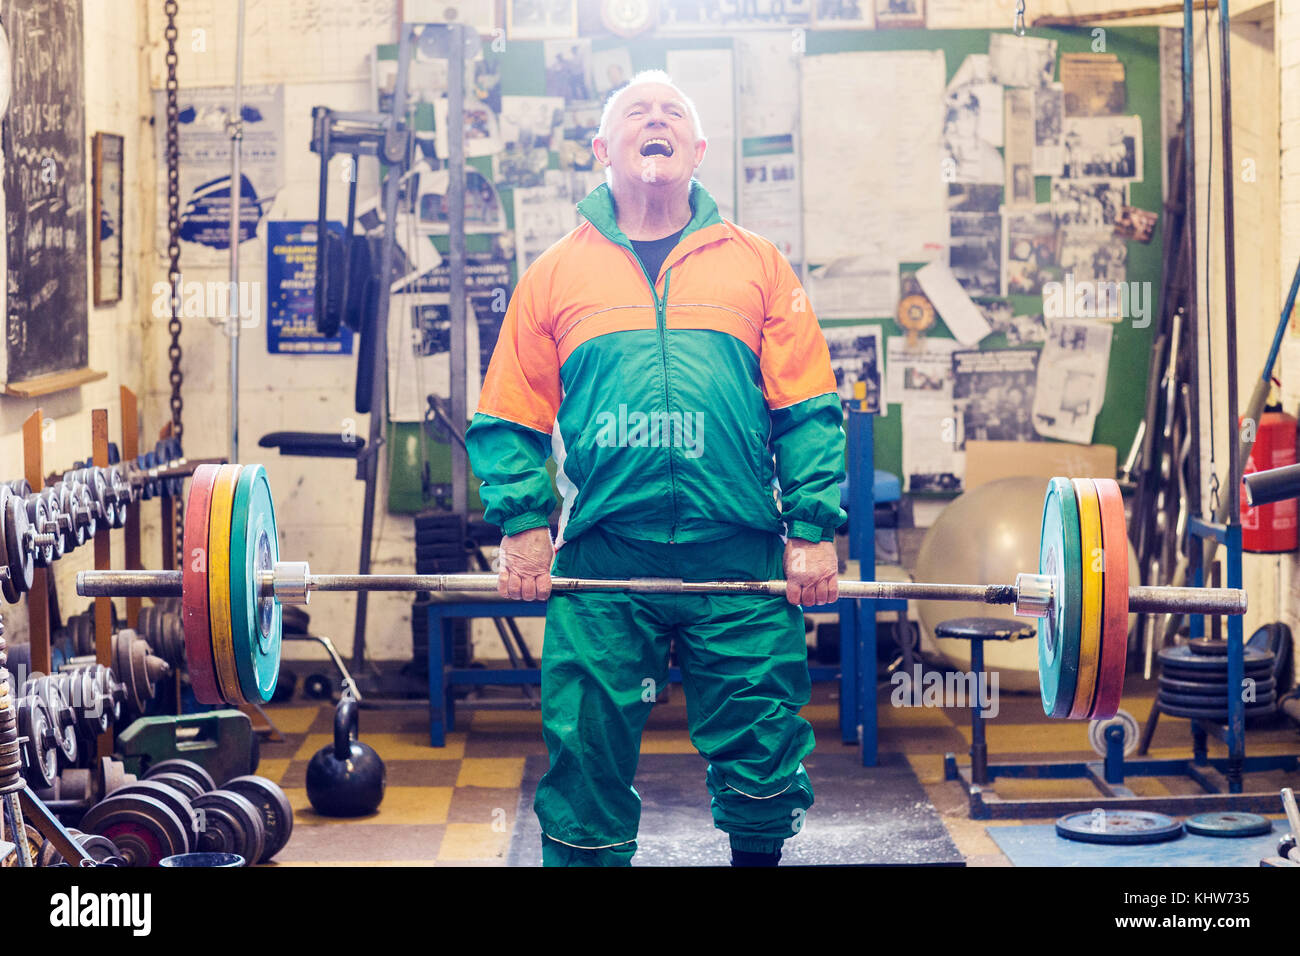 Senior male powerlifter struggling to lift barbell in gym Stock Photo